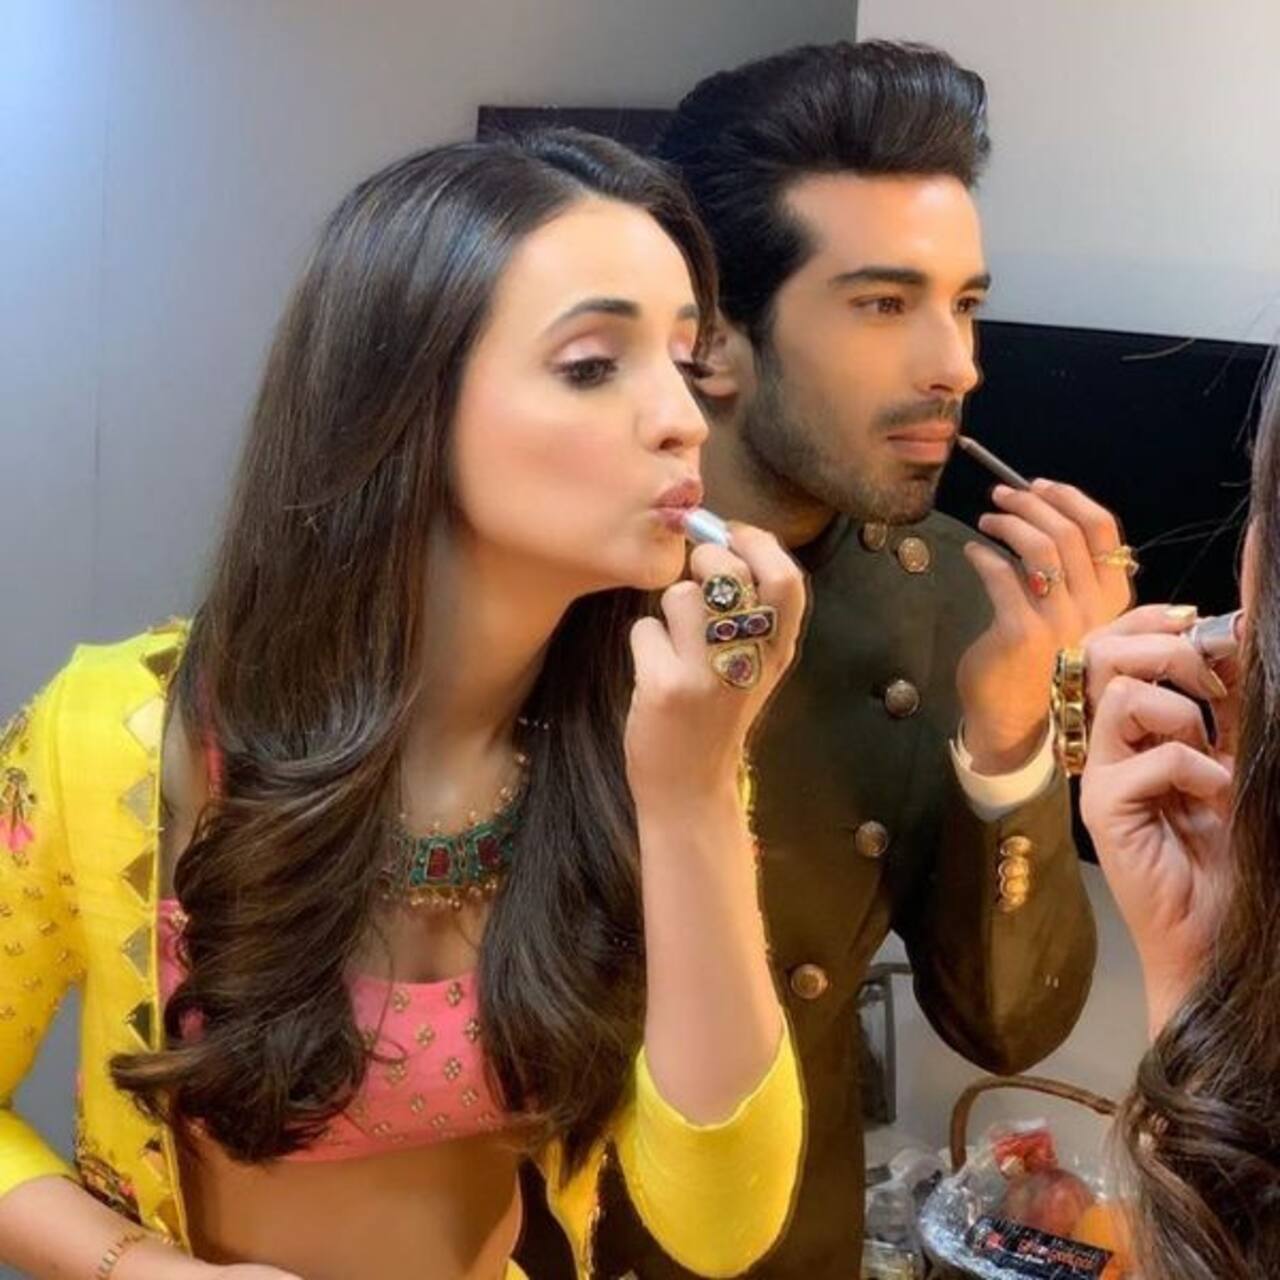 Sanaya Irani and Mohit Sehgal's picture is getting showered with love by  'Monaya' fans